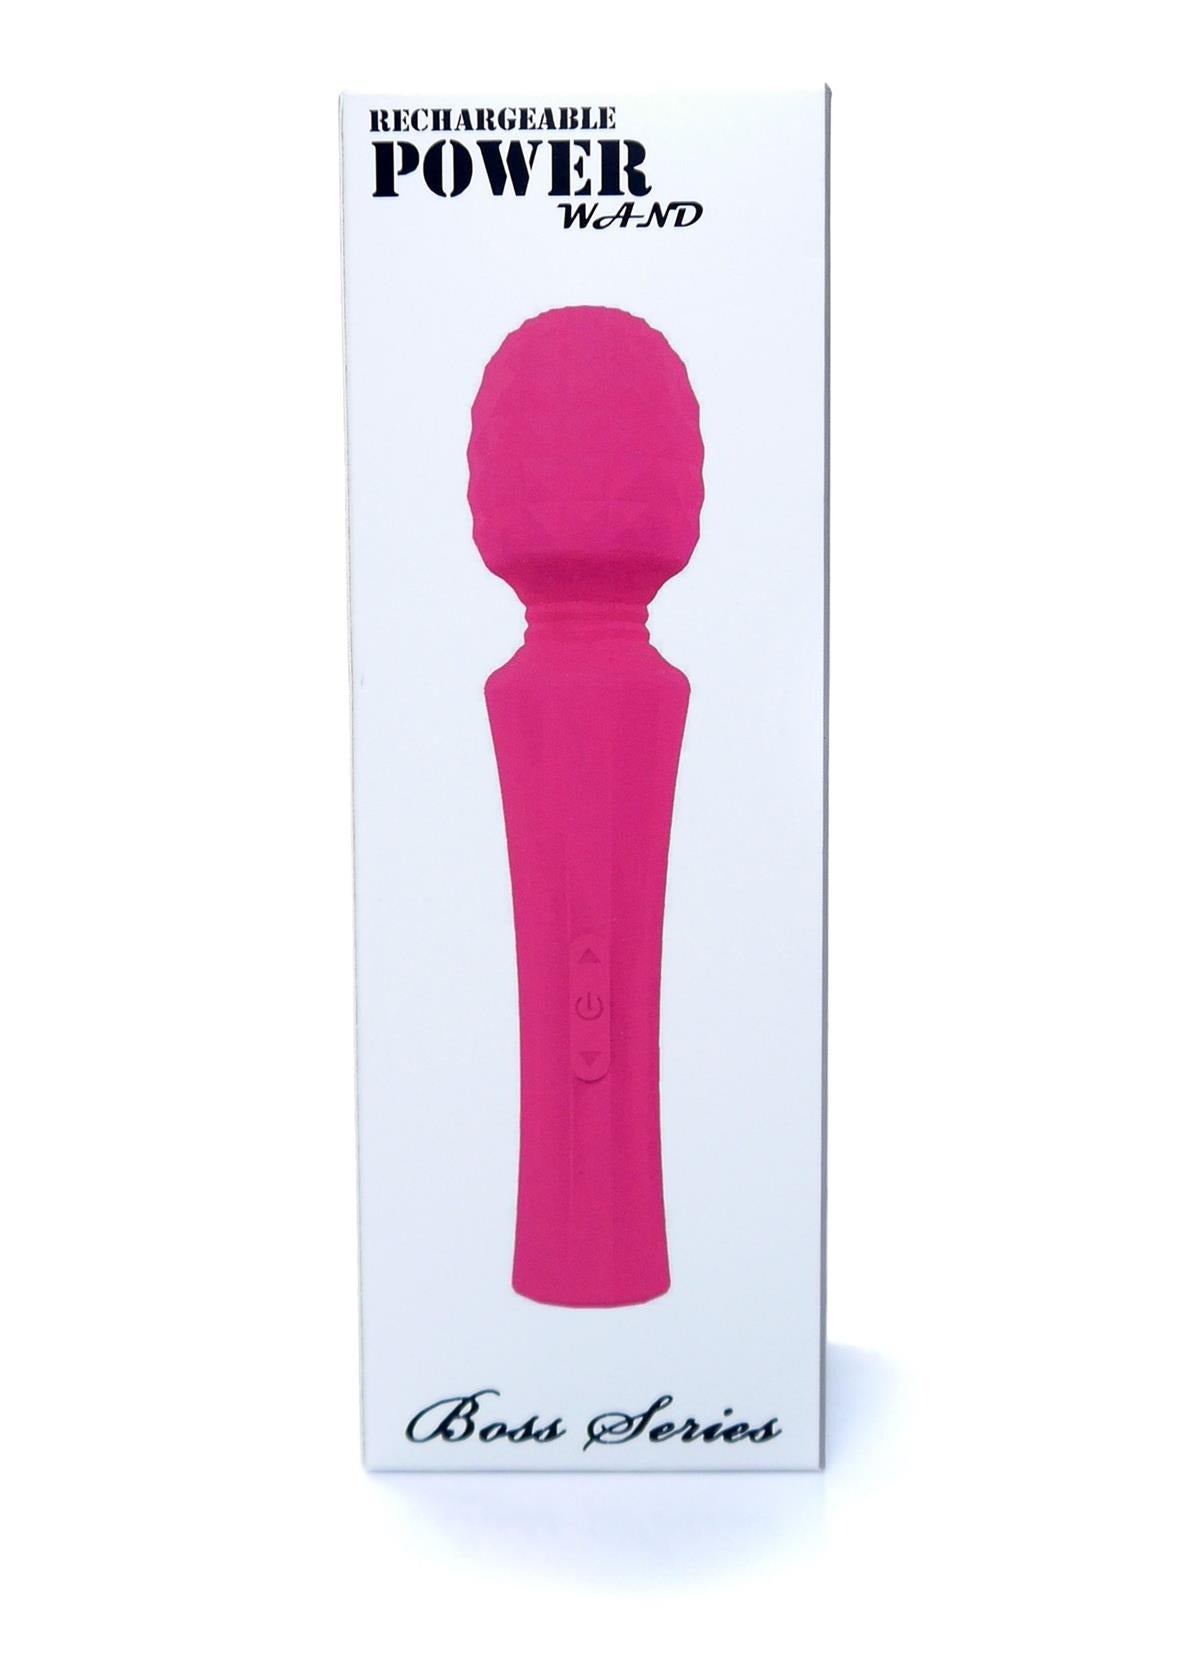 Bossoftoys - 22-00029 - Power wand Massager - Rechargeable - Silicone - 10 Function - Pink - Colour Box